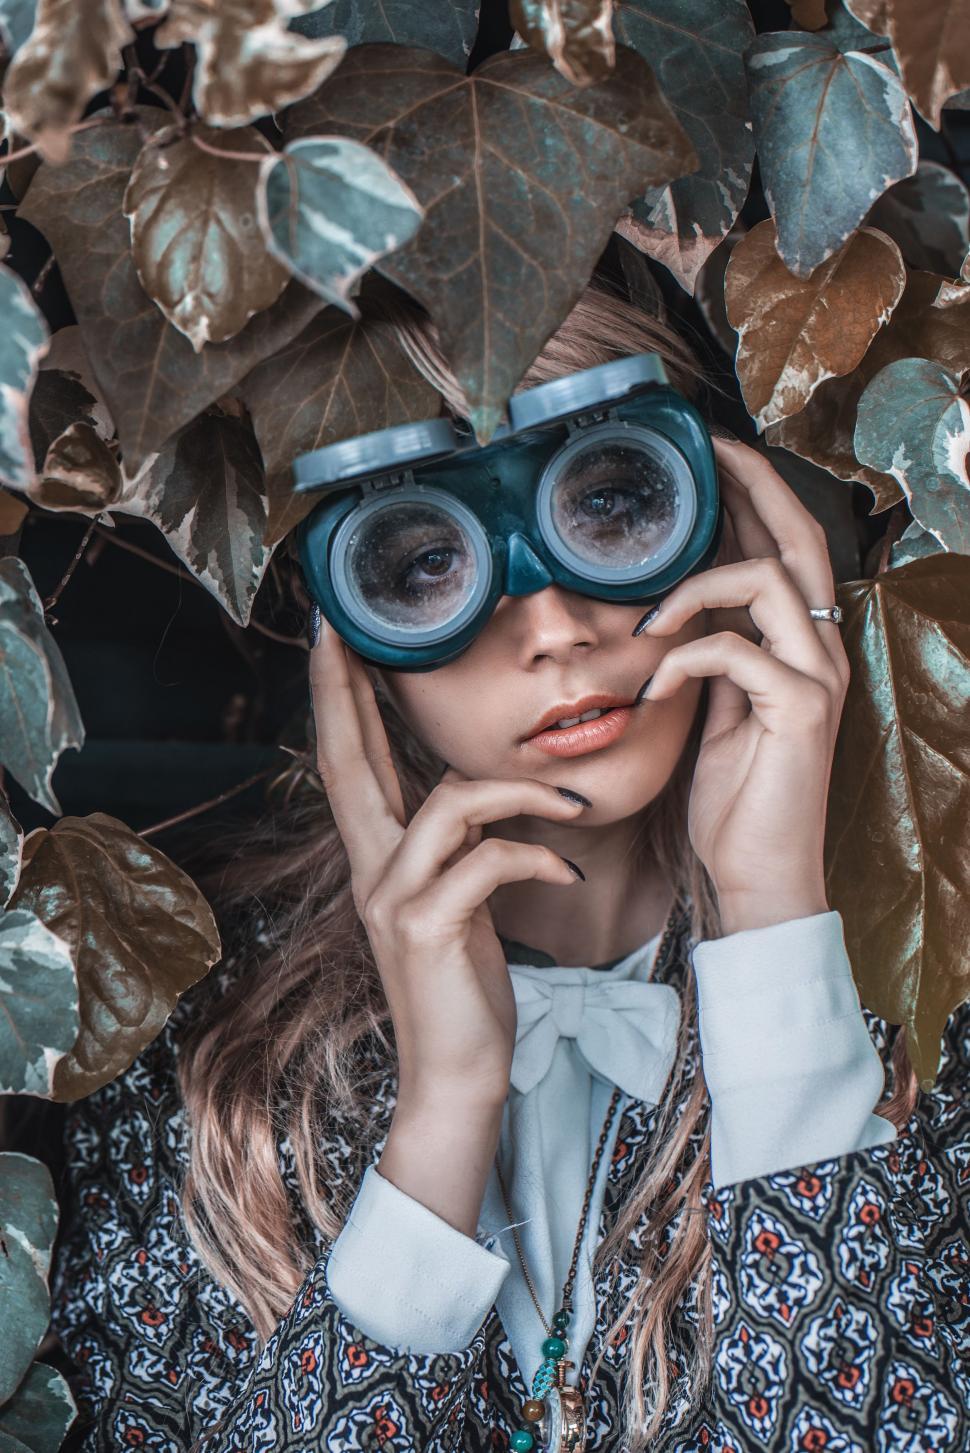 Free Image of Woman Wearing Goggles and Shirt With Leaves 